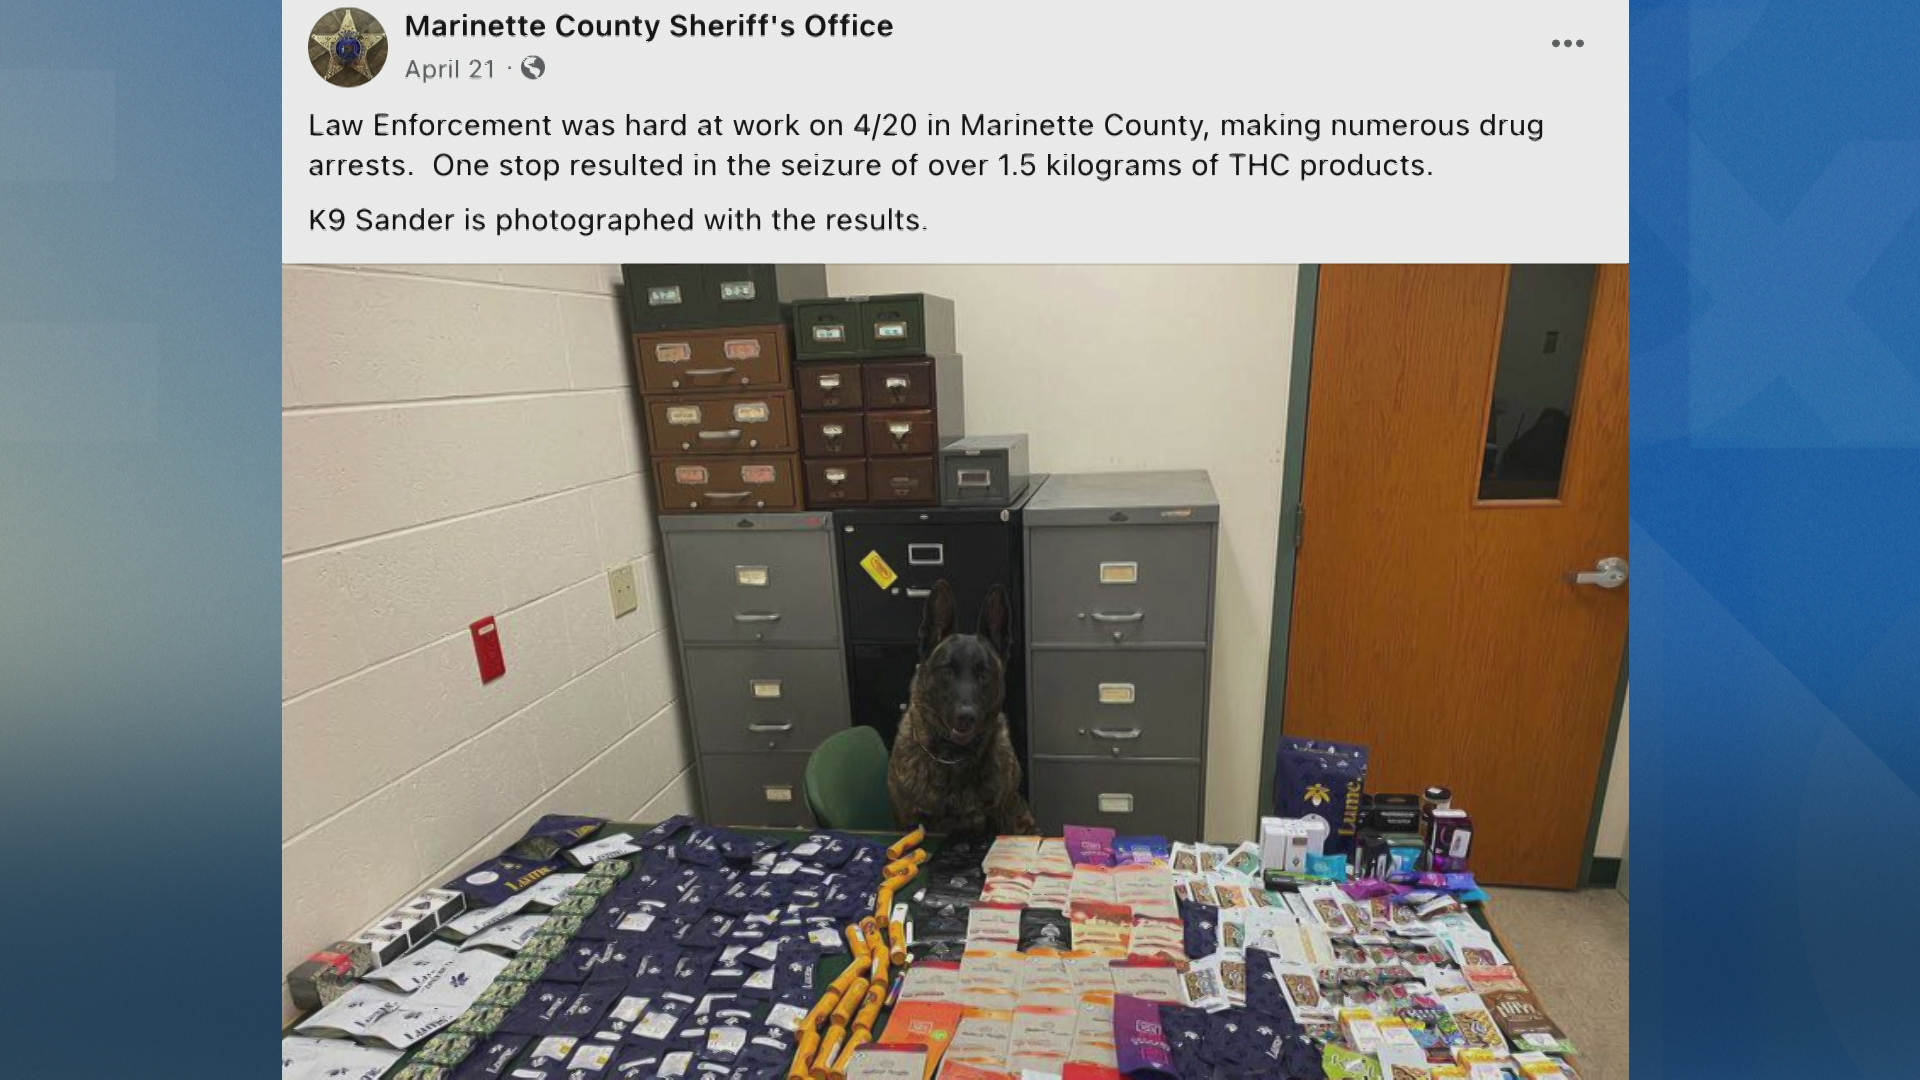 A screenshot of a Facebook posts shows the account name "Marinette County Sheriff's Office" and date of "April 21" above summary text related to a photo showing a dog standing behind a table filled with retail THC products in a room with file cabinets and a door with a window.